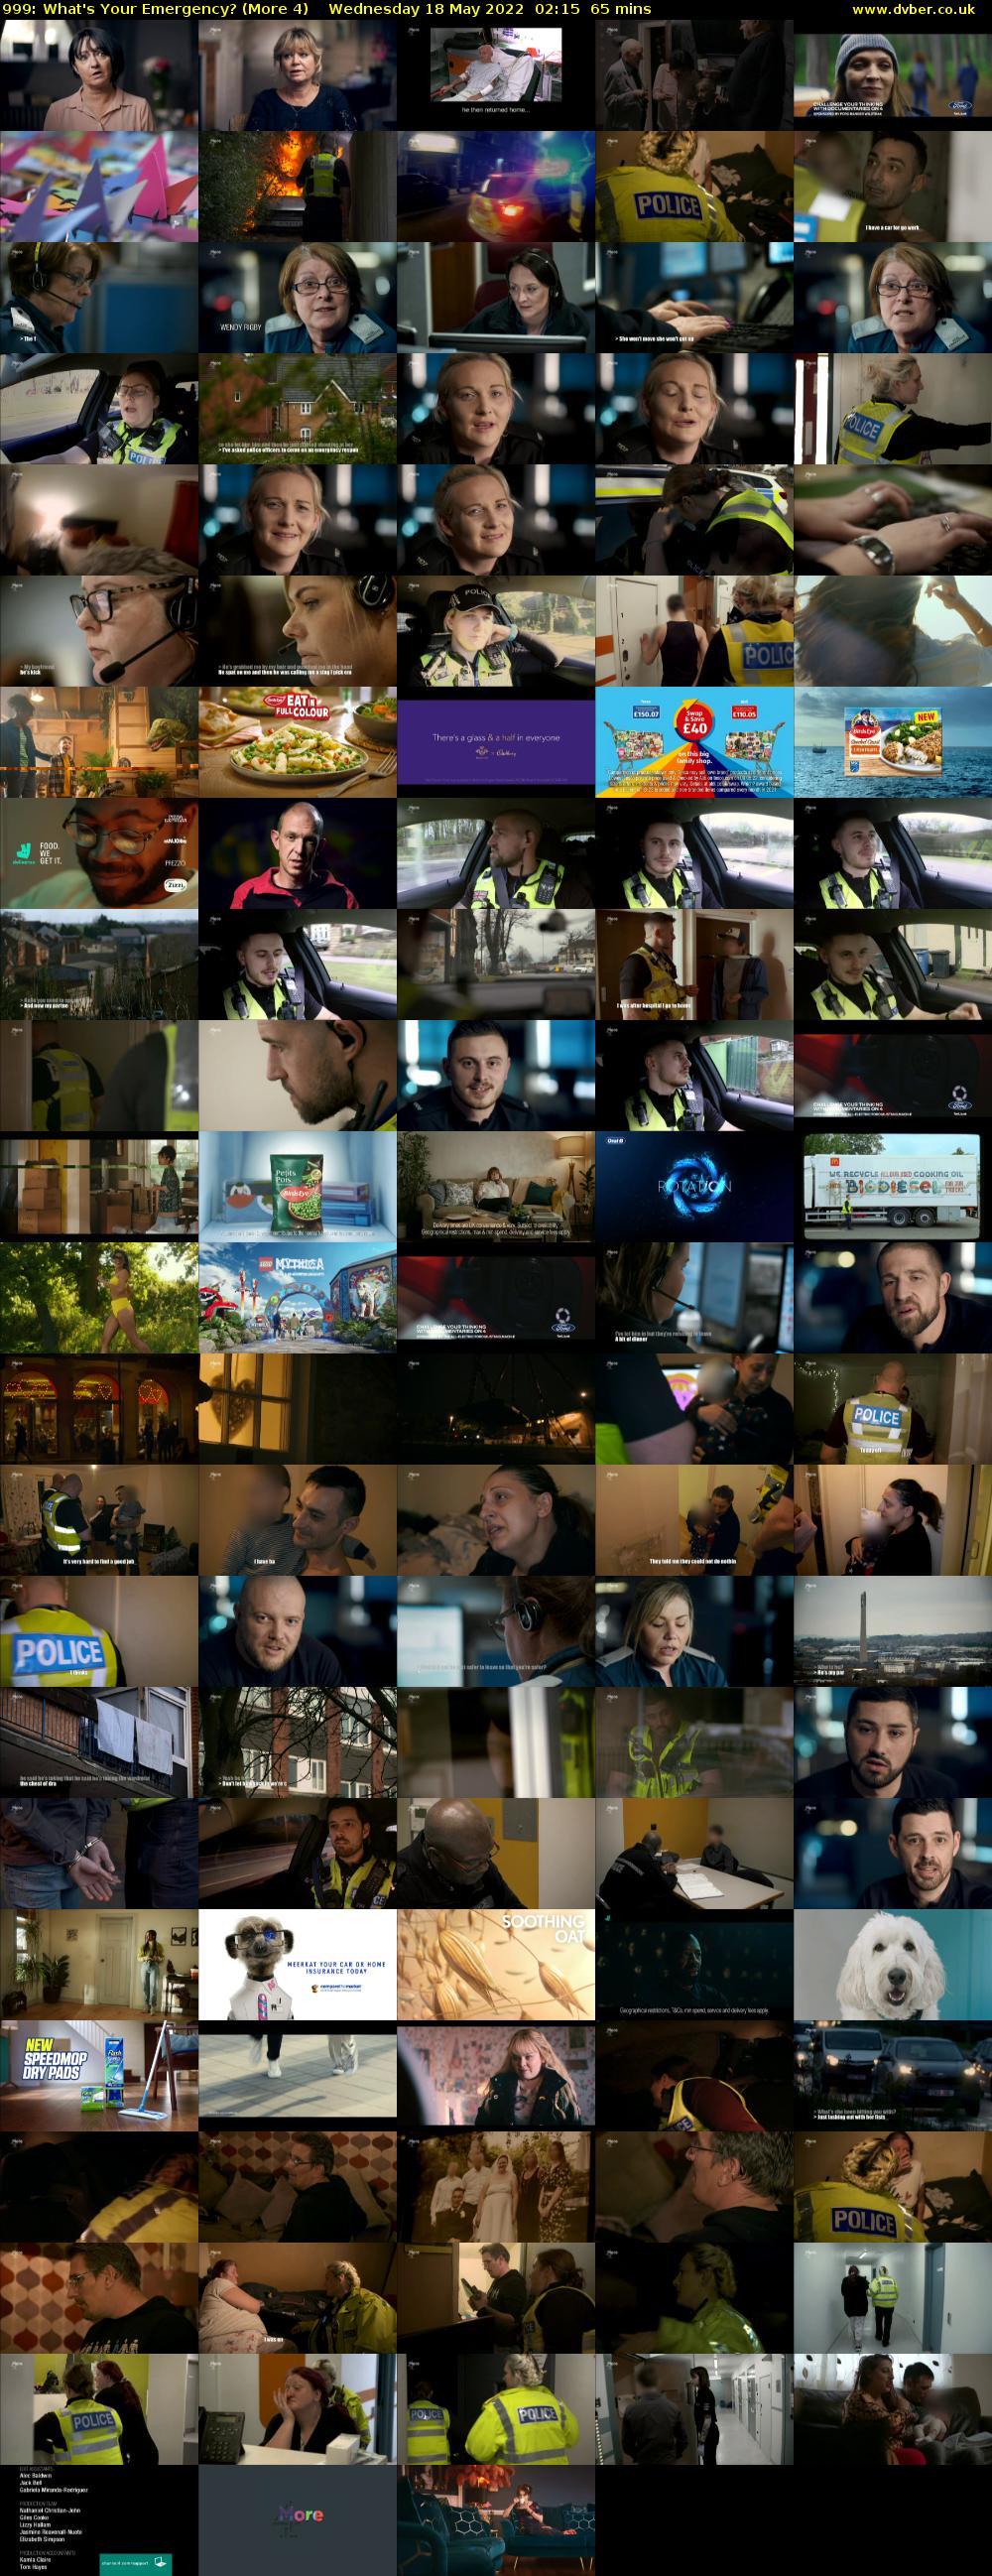 999: What's Your Emergency? (More 4) Wednesday 18 May 2022 02:15 - 03:20